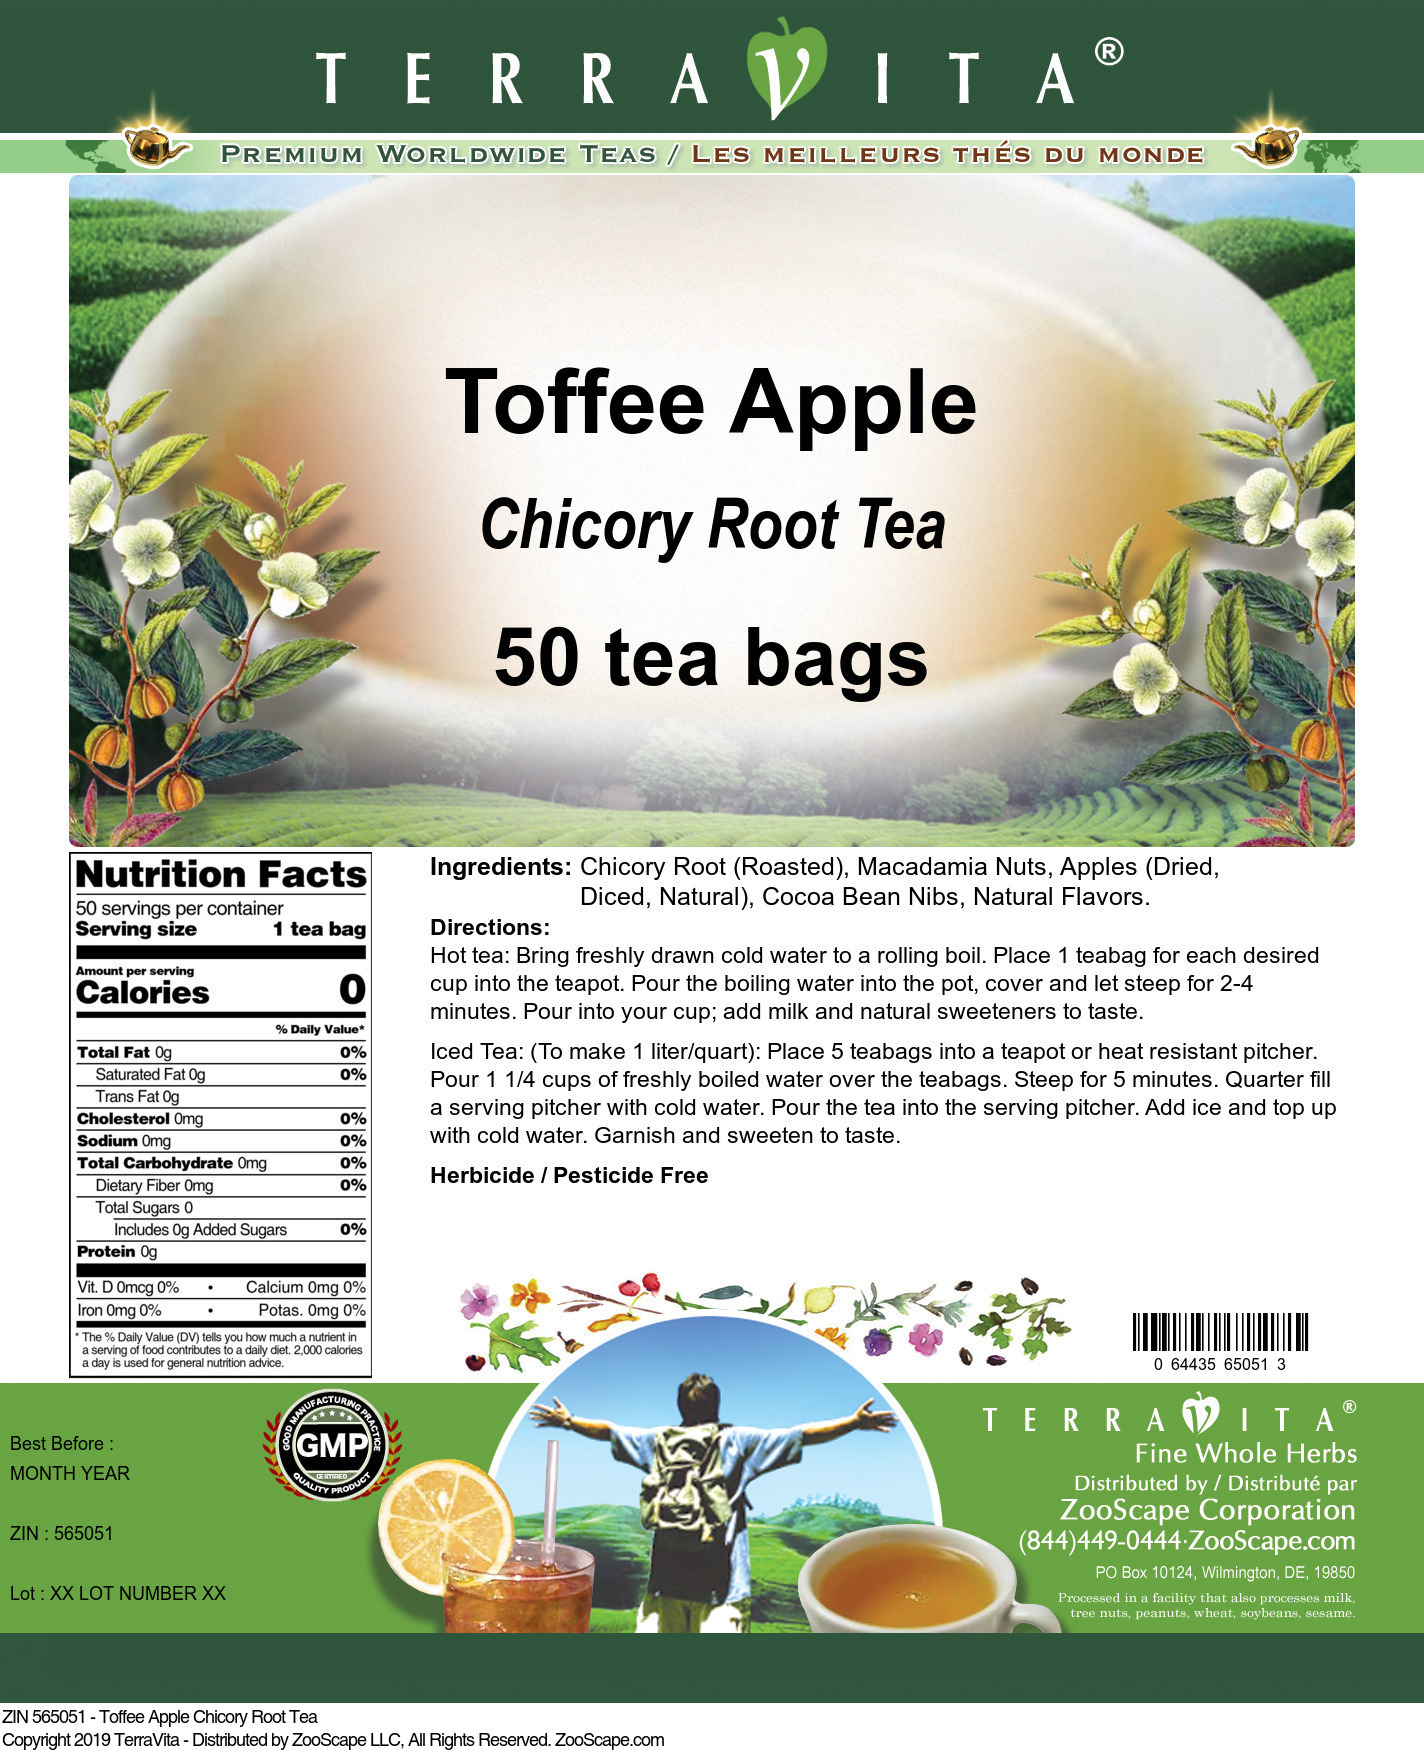 Toffee Apple Chicory Root Tea - Label